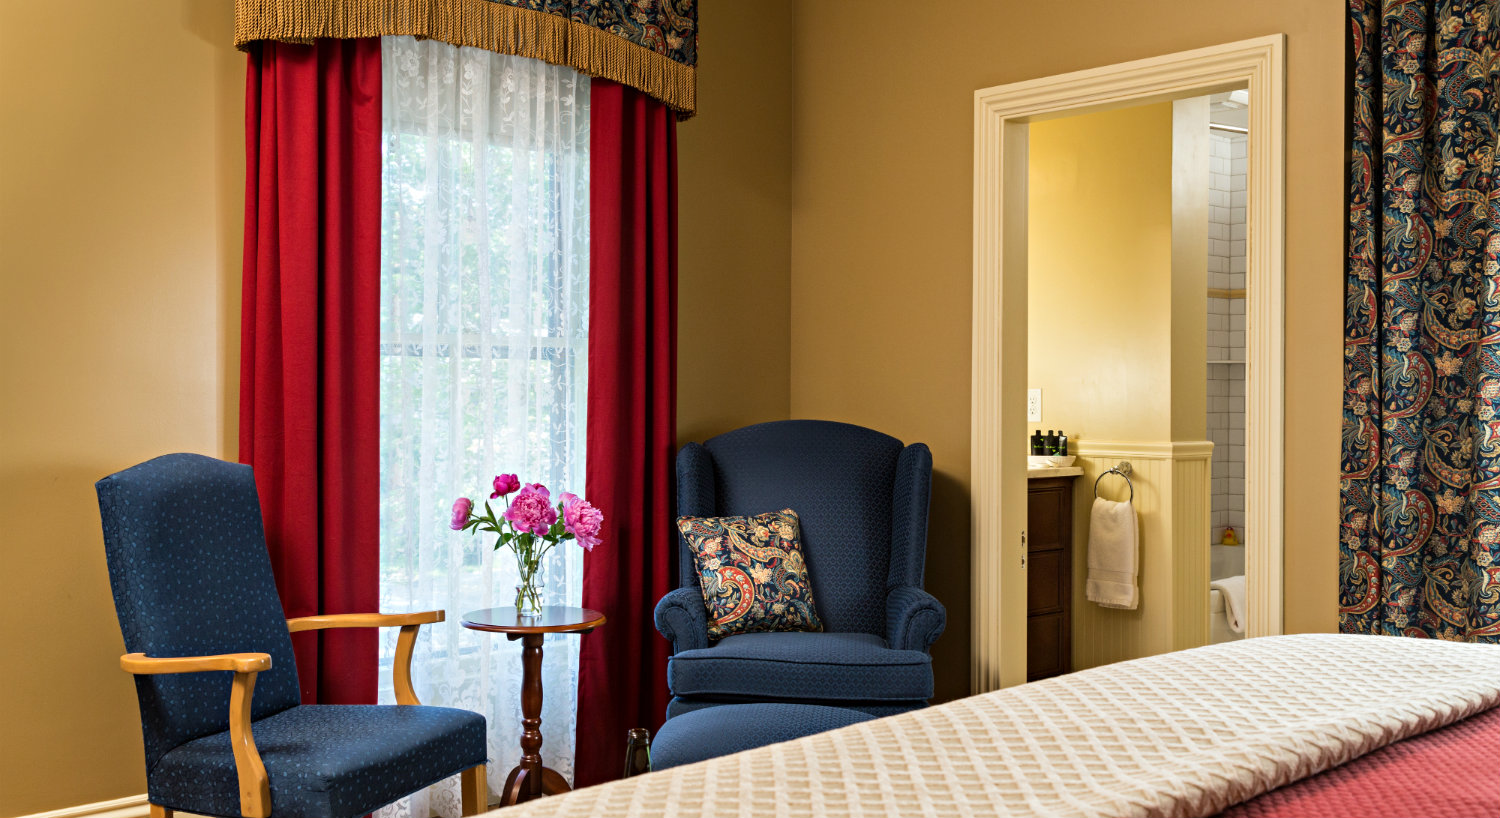 Elegant guest room with beige walls, red curtains and a large bed alongside two blue chairs.